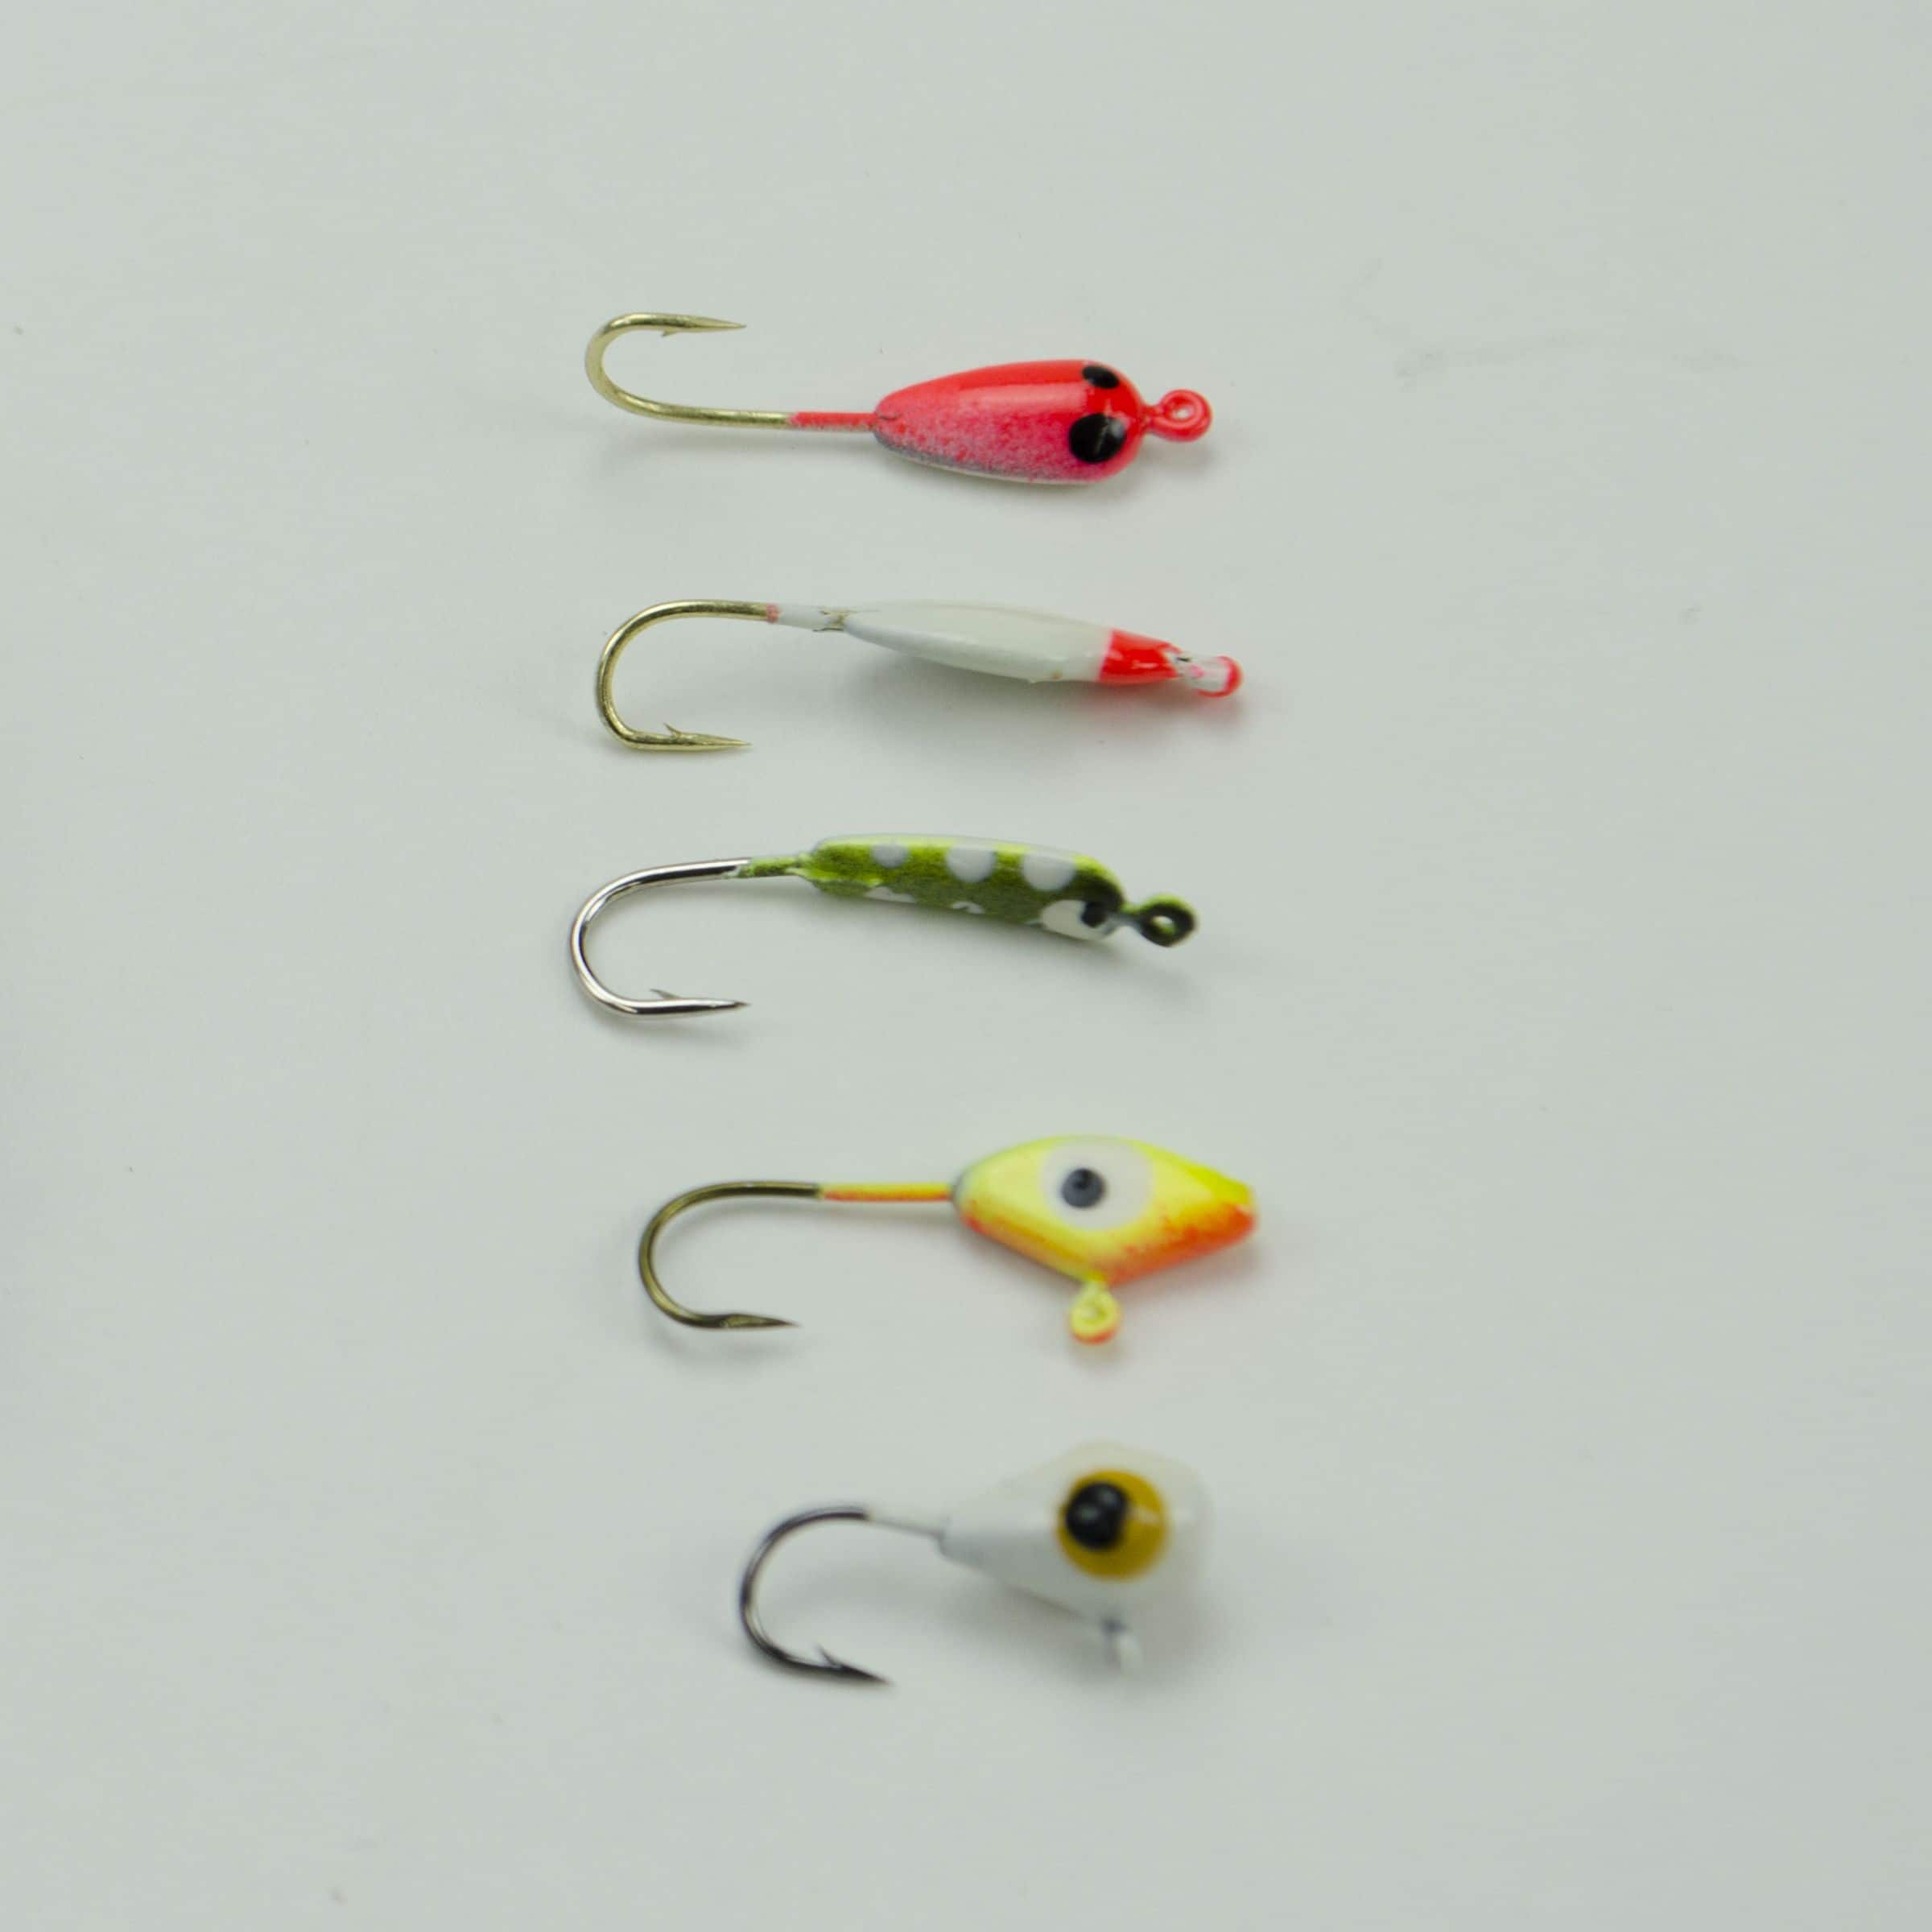 https://media-www.canadiantire.ca/product/playing/fishing/ice-fishing/0778511/ht-hardwater-micro-jig-moon-glitter-assorted-5-pack-29b500b1-8028-4838-bff8-98ed1cad6c1d-jpgrendition.jpg